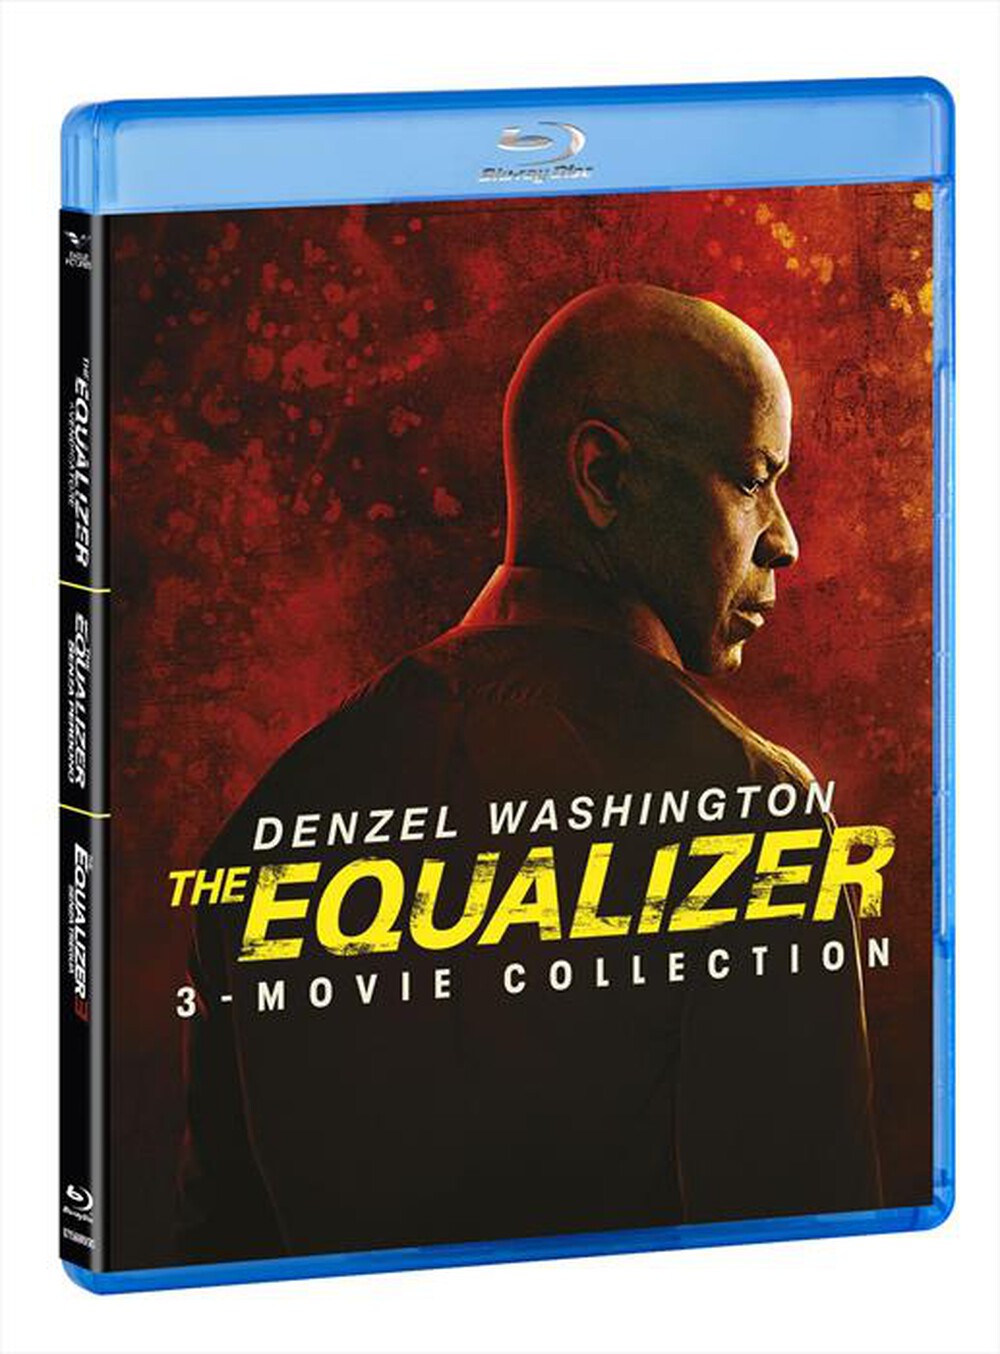 "SONY PICTURES - Equalizer (The) Collection (3 Blu-Ray)"